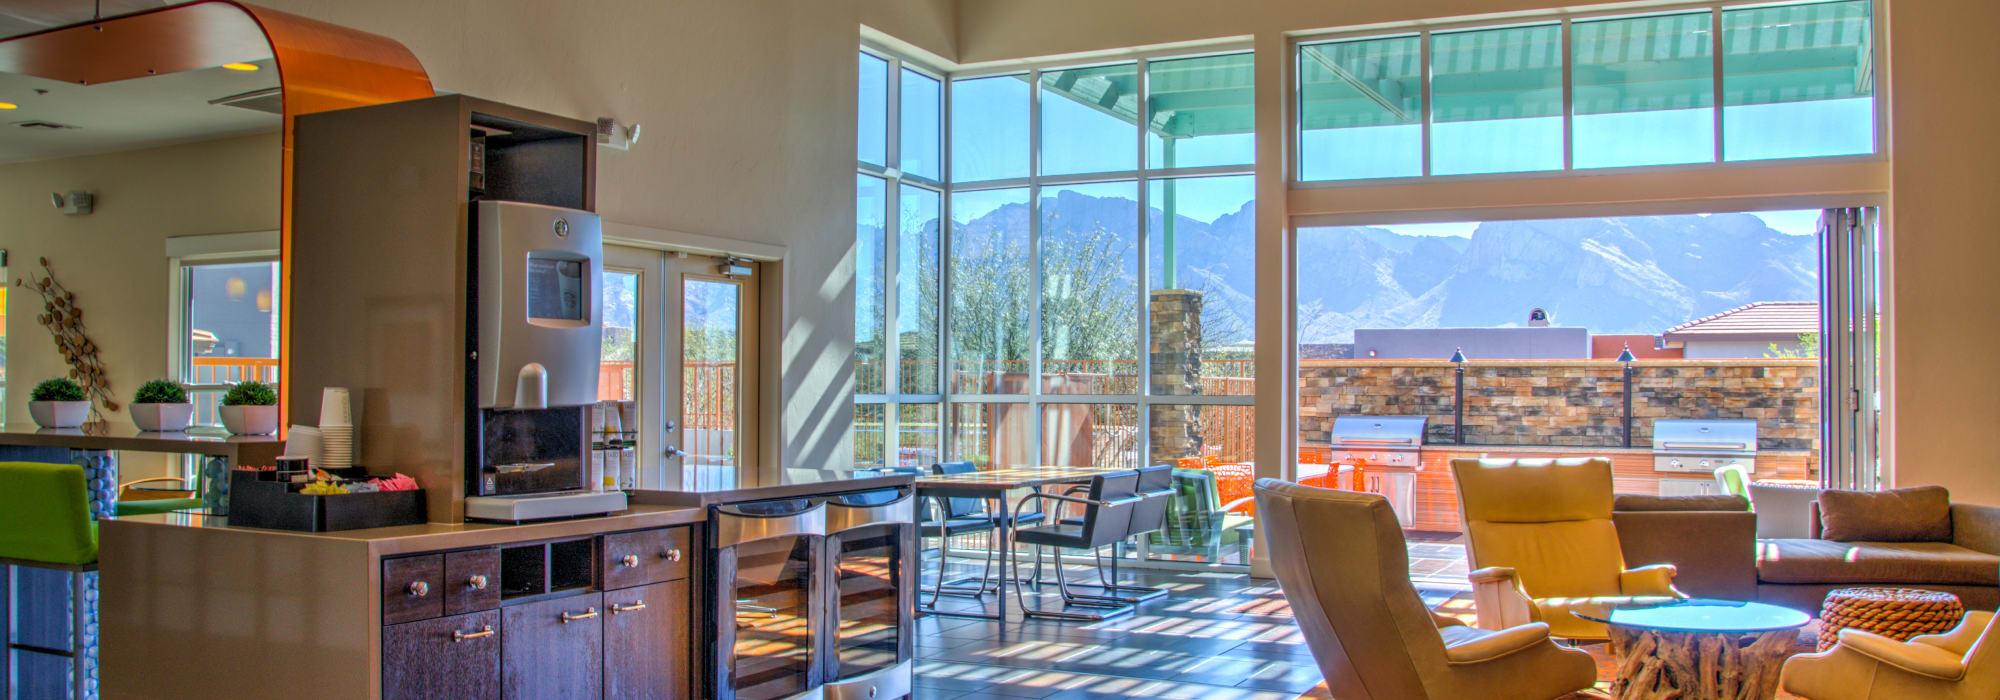 Apartments In North Tucson Az The Golf Villas At Oro Valley